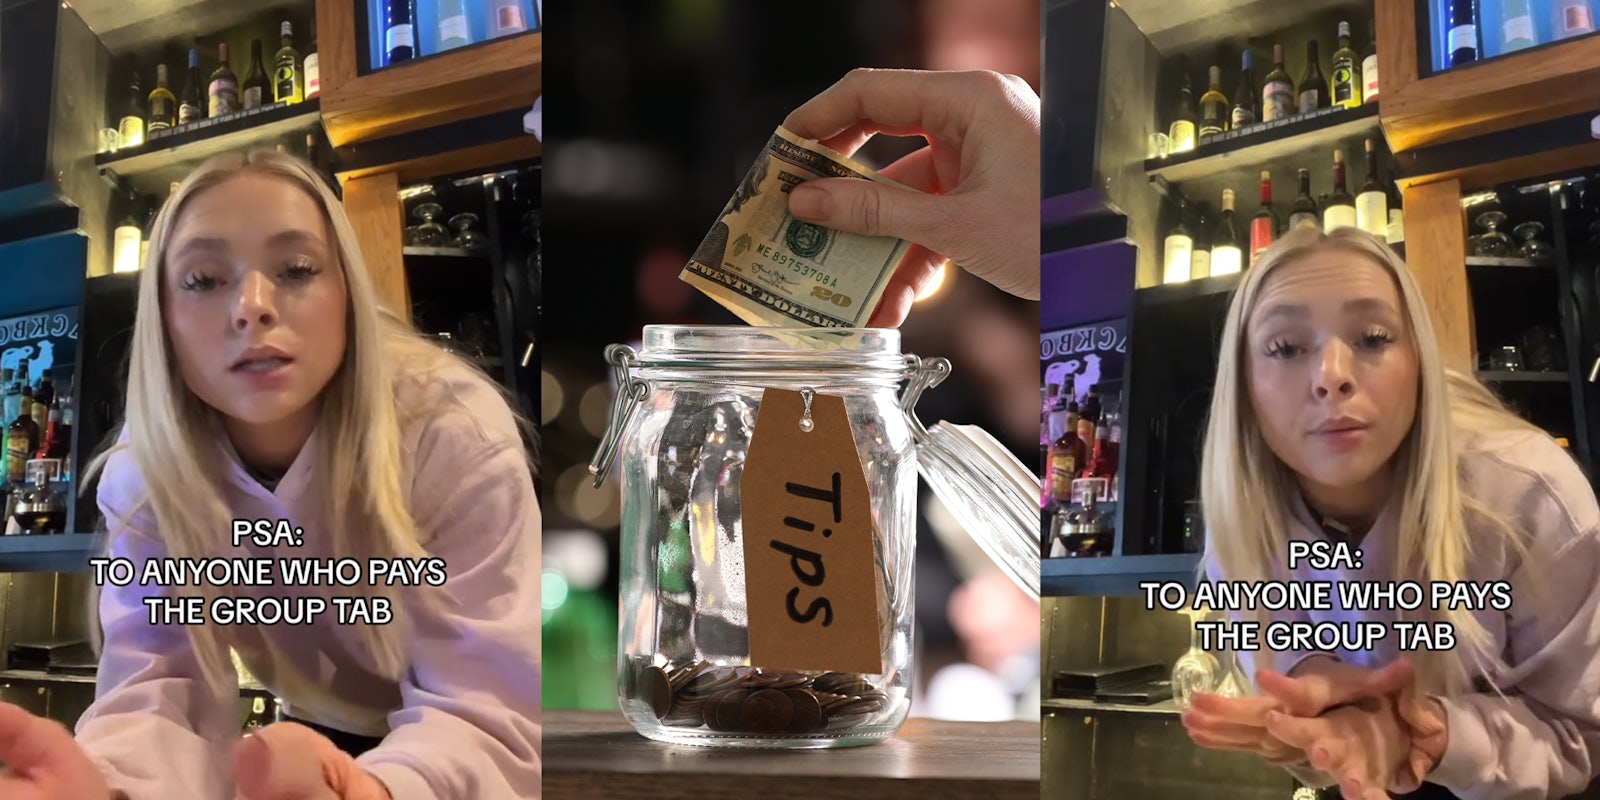 Bartender shares PSA to customers who insist on paying group tab, but leave bad tip